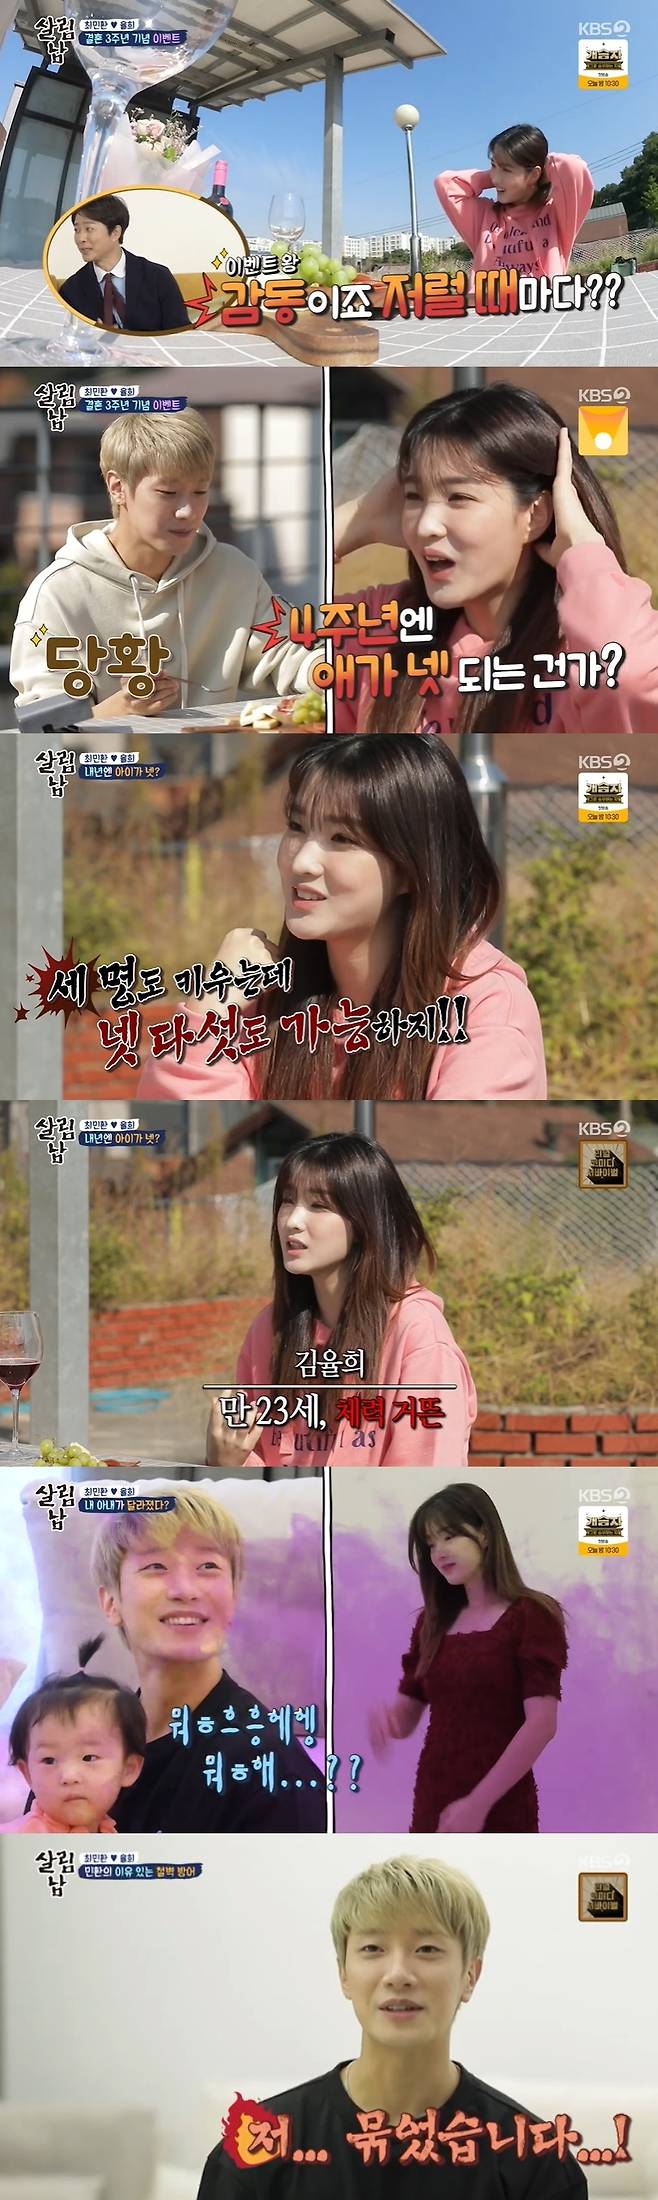 Kim Yul-hee revealed her fourth birth desire.On KBS 2TVs Liver Men Season 2, which was broadcast on November 13, the daily life of Choi Min-hwan and Kim Yul-hee, who celebrated their third anniversary, was revealed.Choi Min-hwan set up a party on the rooftop for the third anniversary of marriage.Kim Yul-hee, who is thrilled with the small event, recounted the marriage life of the past three years and said, I have become five families in three years.I think its the third anniversary, and Ive got three kids, so Ive got four kids in four weeks.Kim Yul-hee said, I found that C-sections are available up to three times in these days, and I have one more chance to give birth. I told my brother at six months of Twins.I miss being a newborn. Were not a family again, are we? Three, four, five, and the same thing will be crazy.Choi Min-hwan, on the other hand, said, I am happy and good now, and I am curious about the fourth, and I have imagined it, but it always ends in imagination.Kim Yul-hee said, The childrens wagons are for four. One seat. Im dragging them alone. Im healthy. Physical strength is always ready.You dont have to worry. The embarrassed Choi Min-hwan touched the child with a marriage ring.Kim Yul-hee appeared in a red dress and seduced Choi Min-hwan in a sexy look.However, Choi Min-hwan hit the iron wall and showed a firm appearance in the fourth.Choi Min-hwan said, I gave birth to a cesarean section from the re-expiration to the Twins.I said I would do it because it could be bad for my wife if I had contraception. 